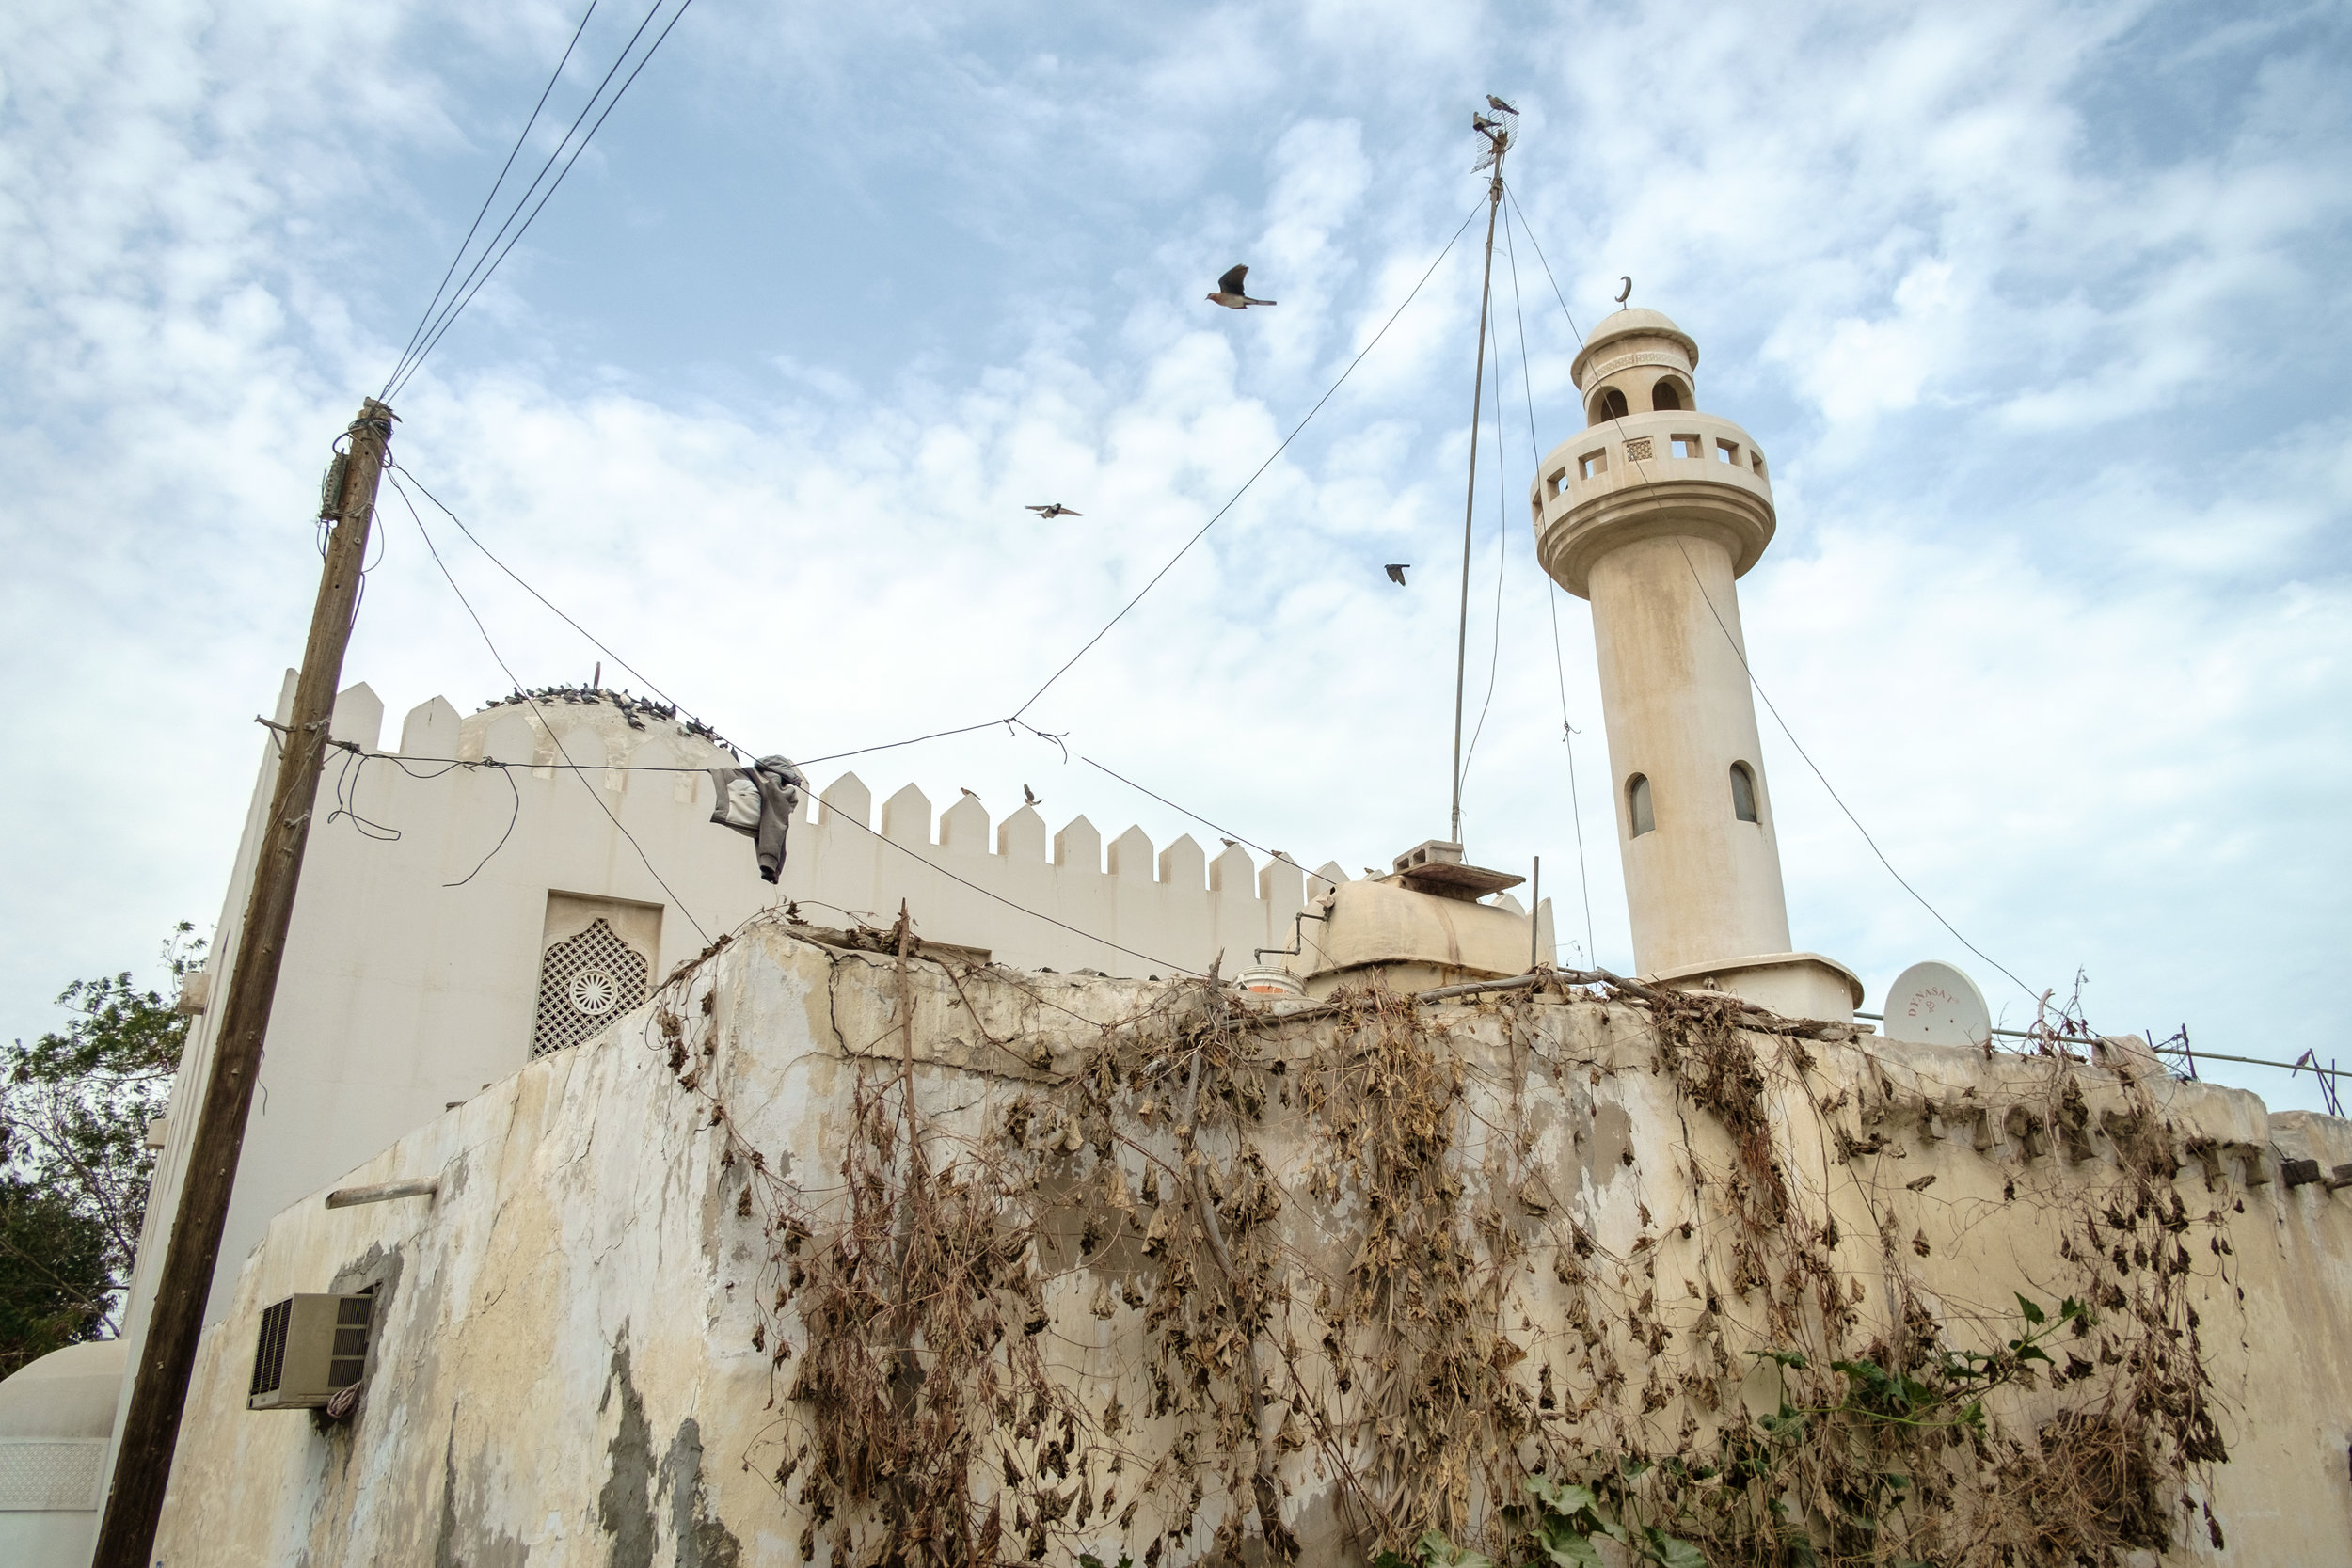  A mosque is seen in the old Musheireb neighborhood of central Doha. Much of this neighborhood has been torn down, and the residents forcibly removed, in order to build the New Msheireb development. Qatar is in a race to revitalize and modernize in t